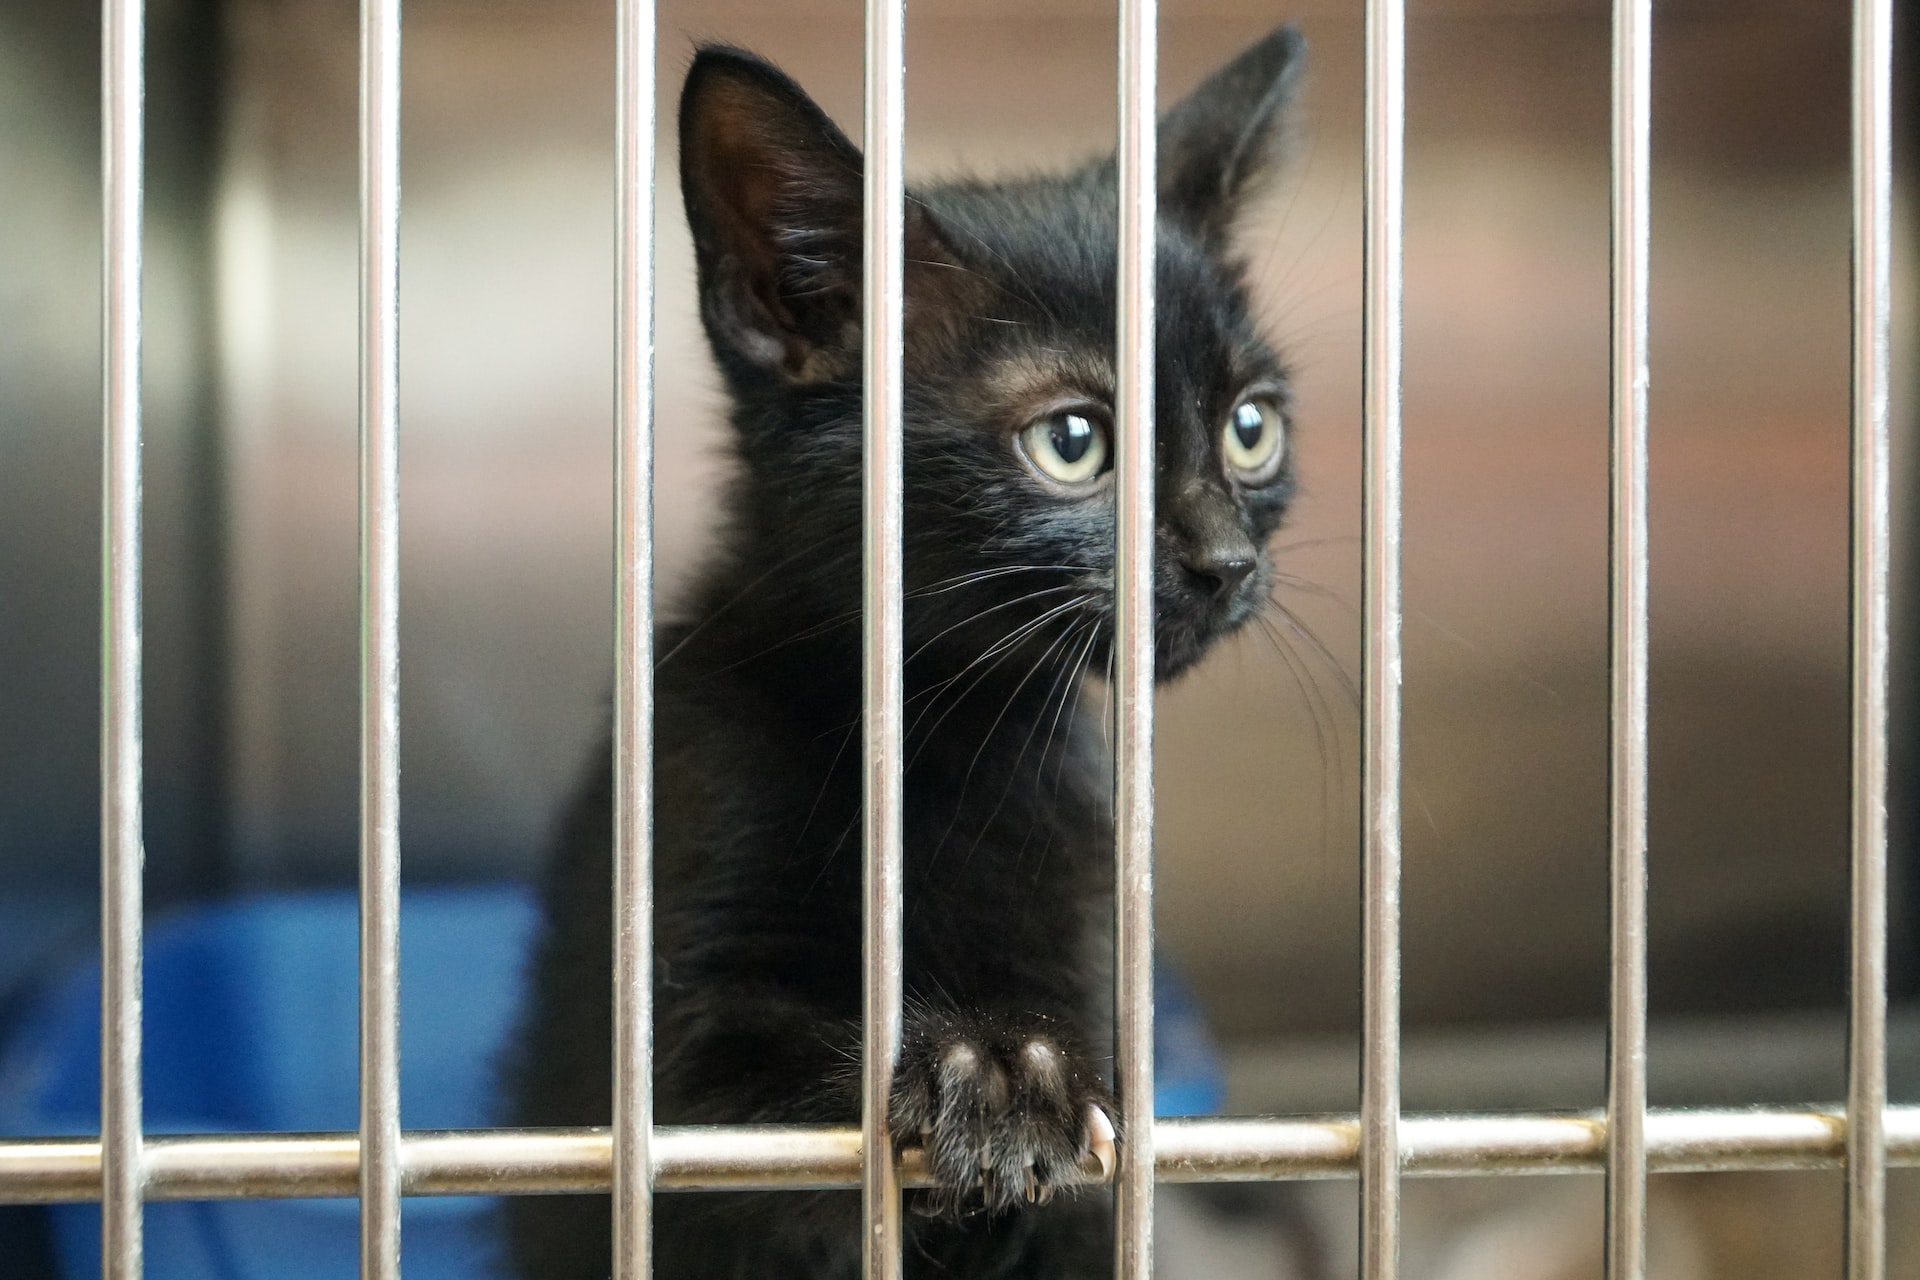 A tiny black kitten in a crate.